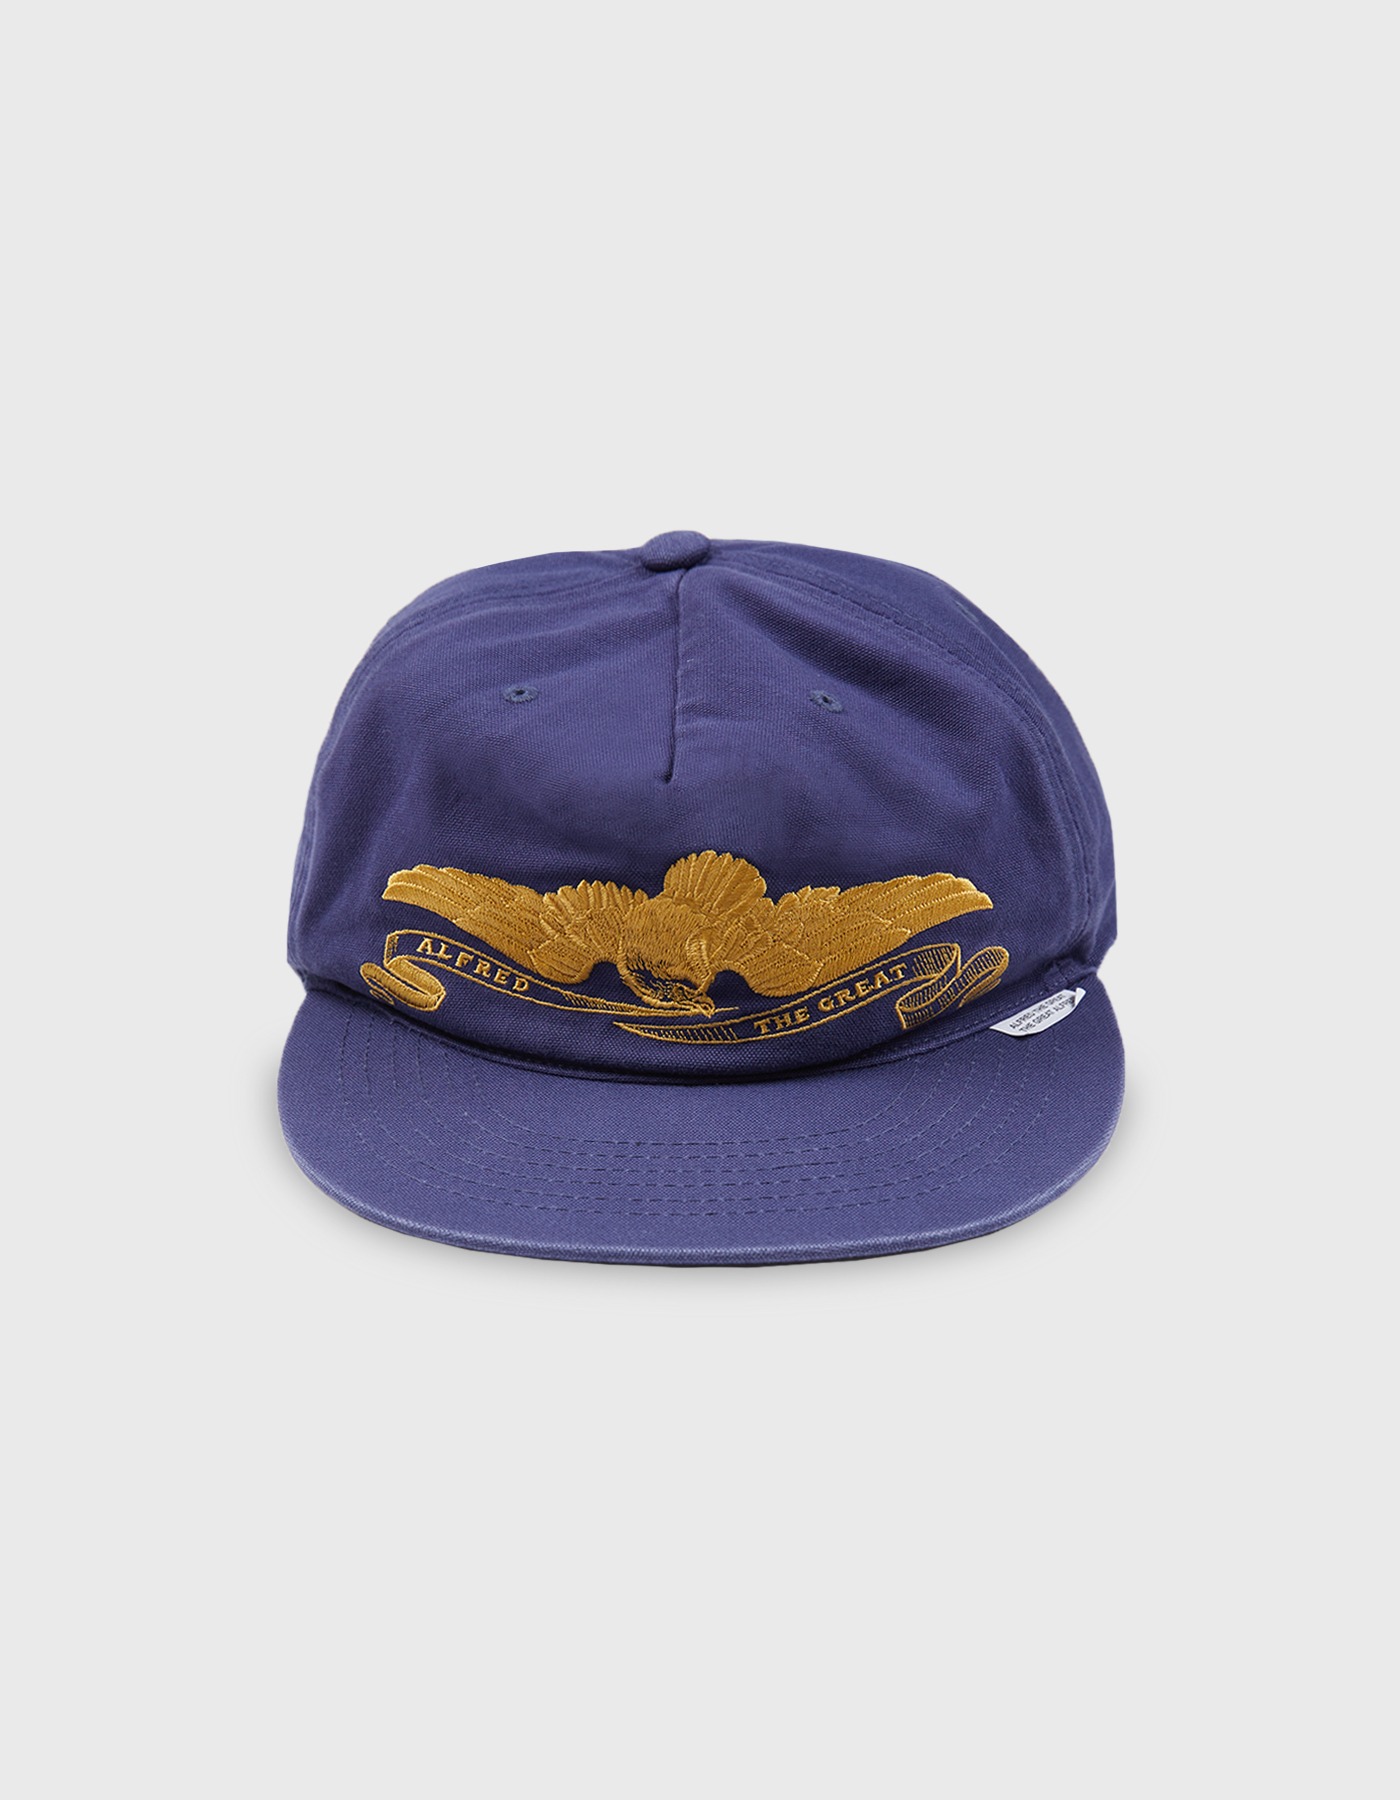 FRED THE GREAT CAP / Navy